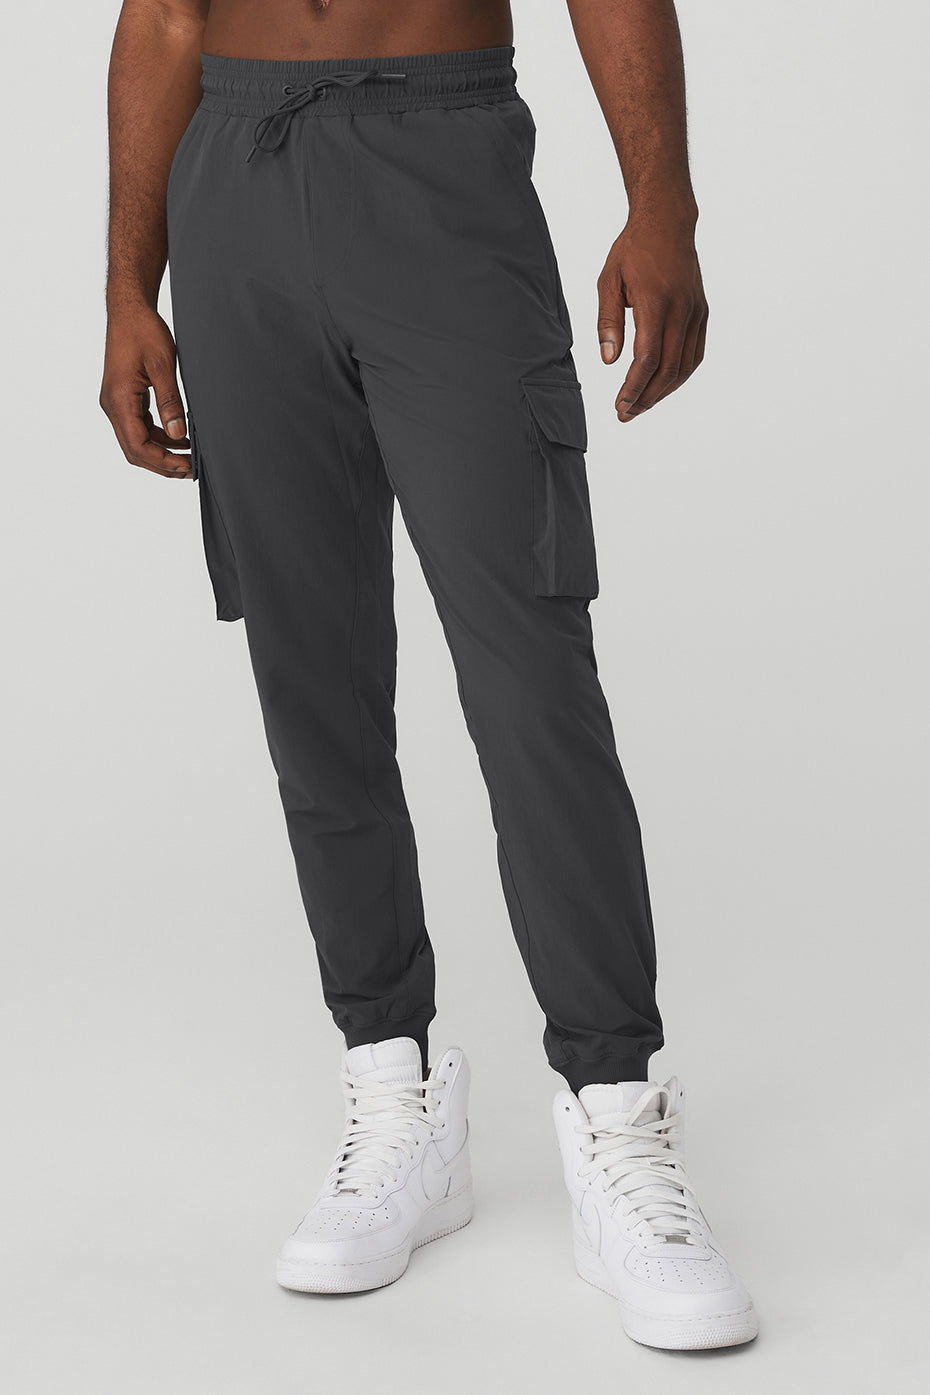 Conquer Pulse Pant - Anthracite